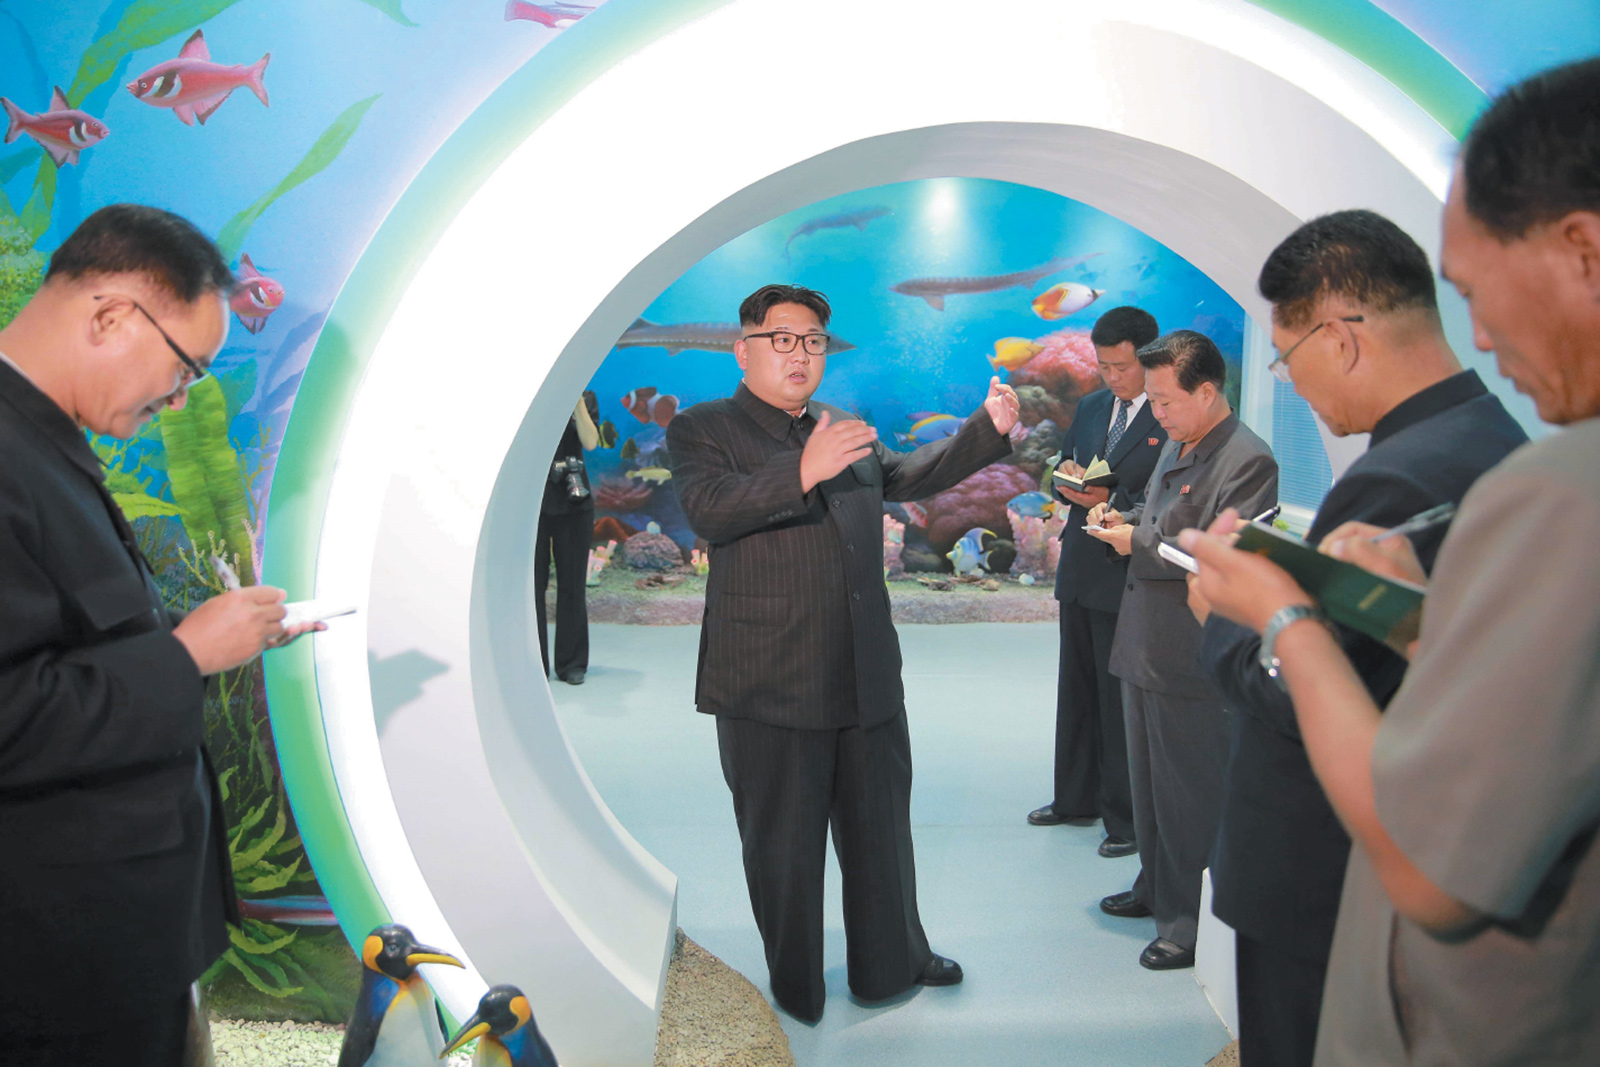 North Korean leader Kim Jong-un inspecting the remodeled Manyongdae children’s camp in Pyongyang; undated photograph released by North Korea’s official Korean Central News Agency on June 4, 2016